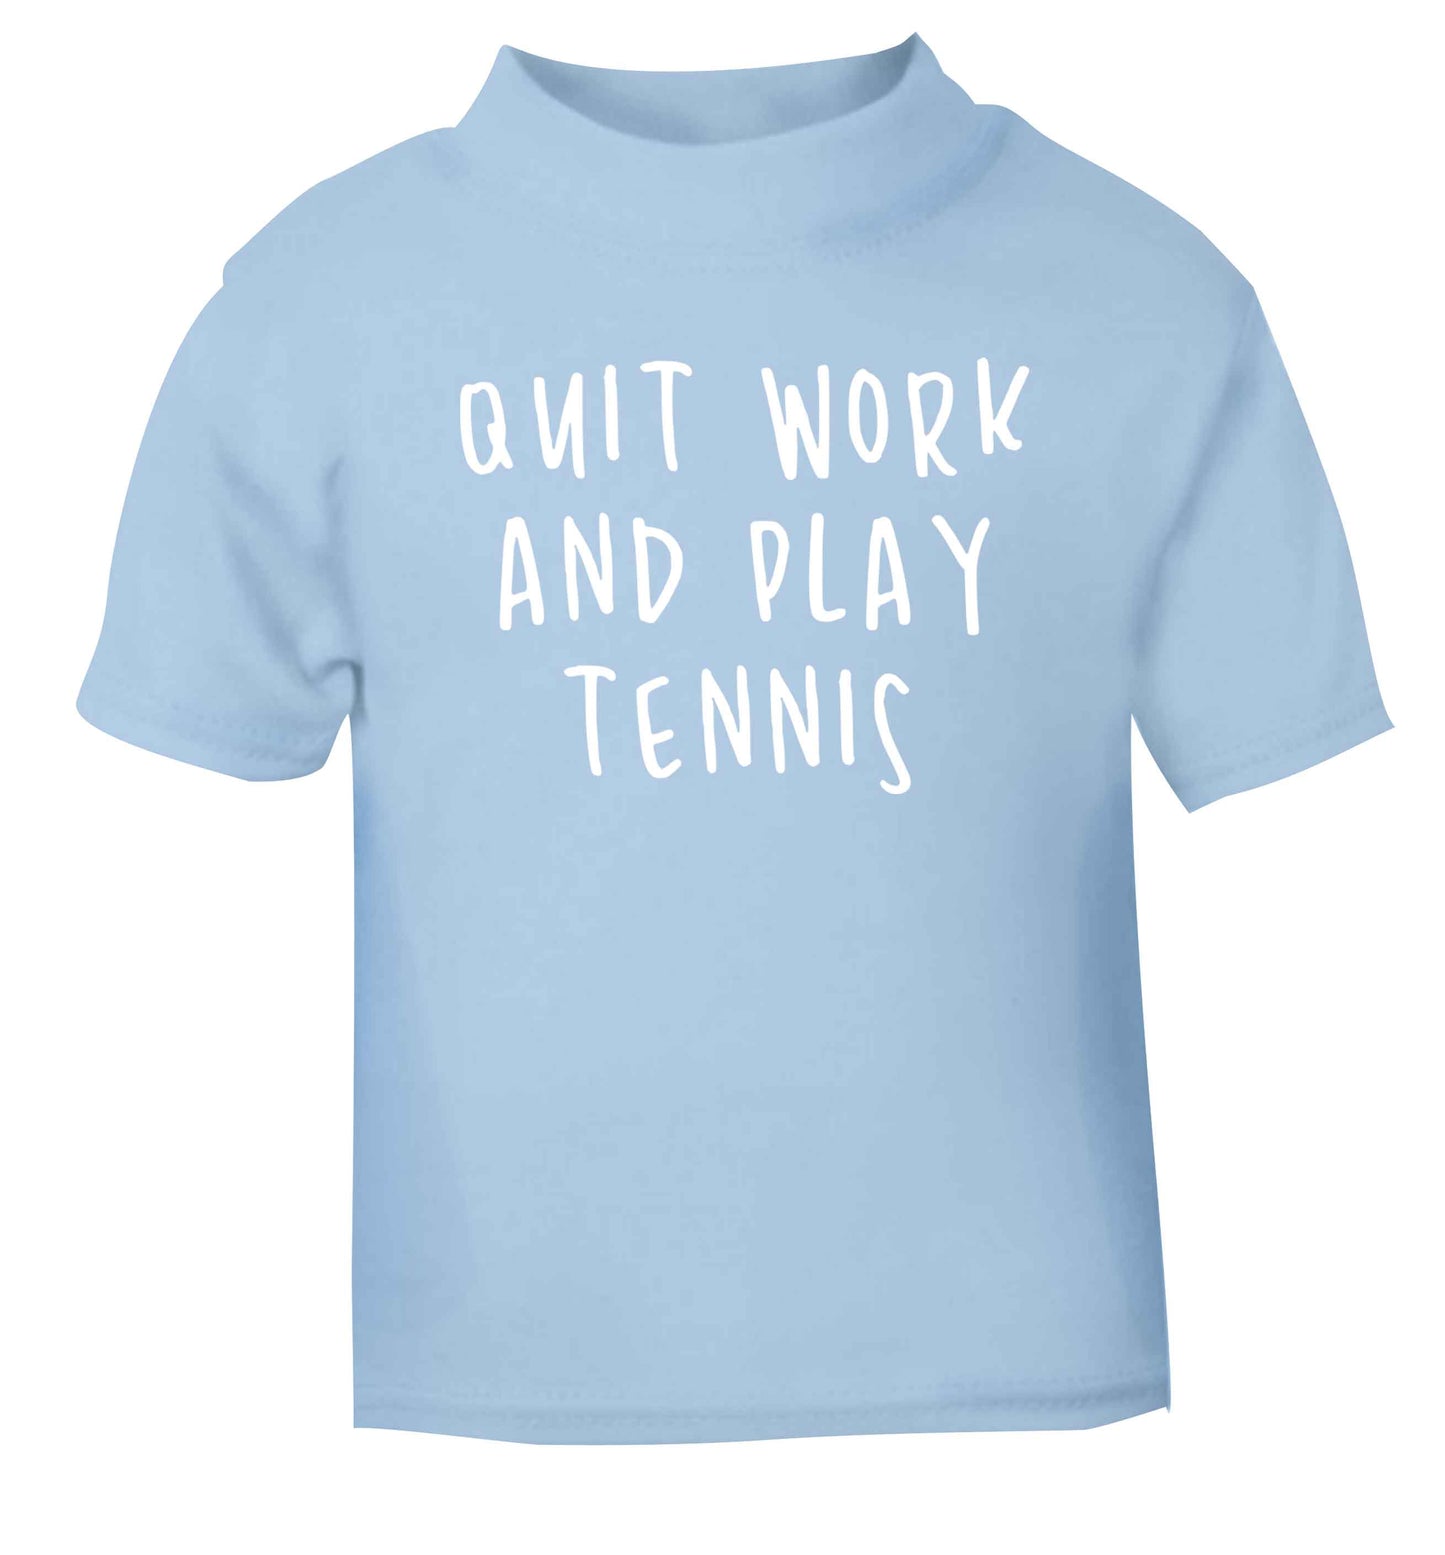 Quit work and play tennis light blue Baby Toddler Tshirt 2 Years